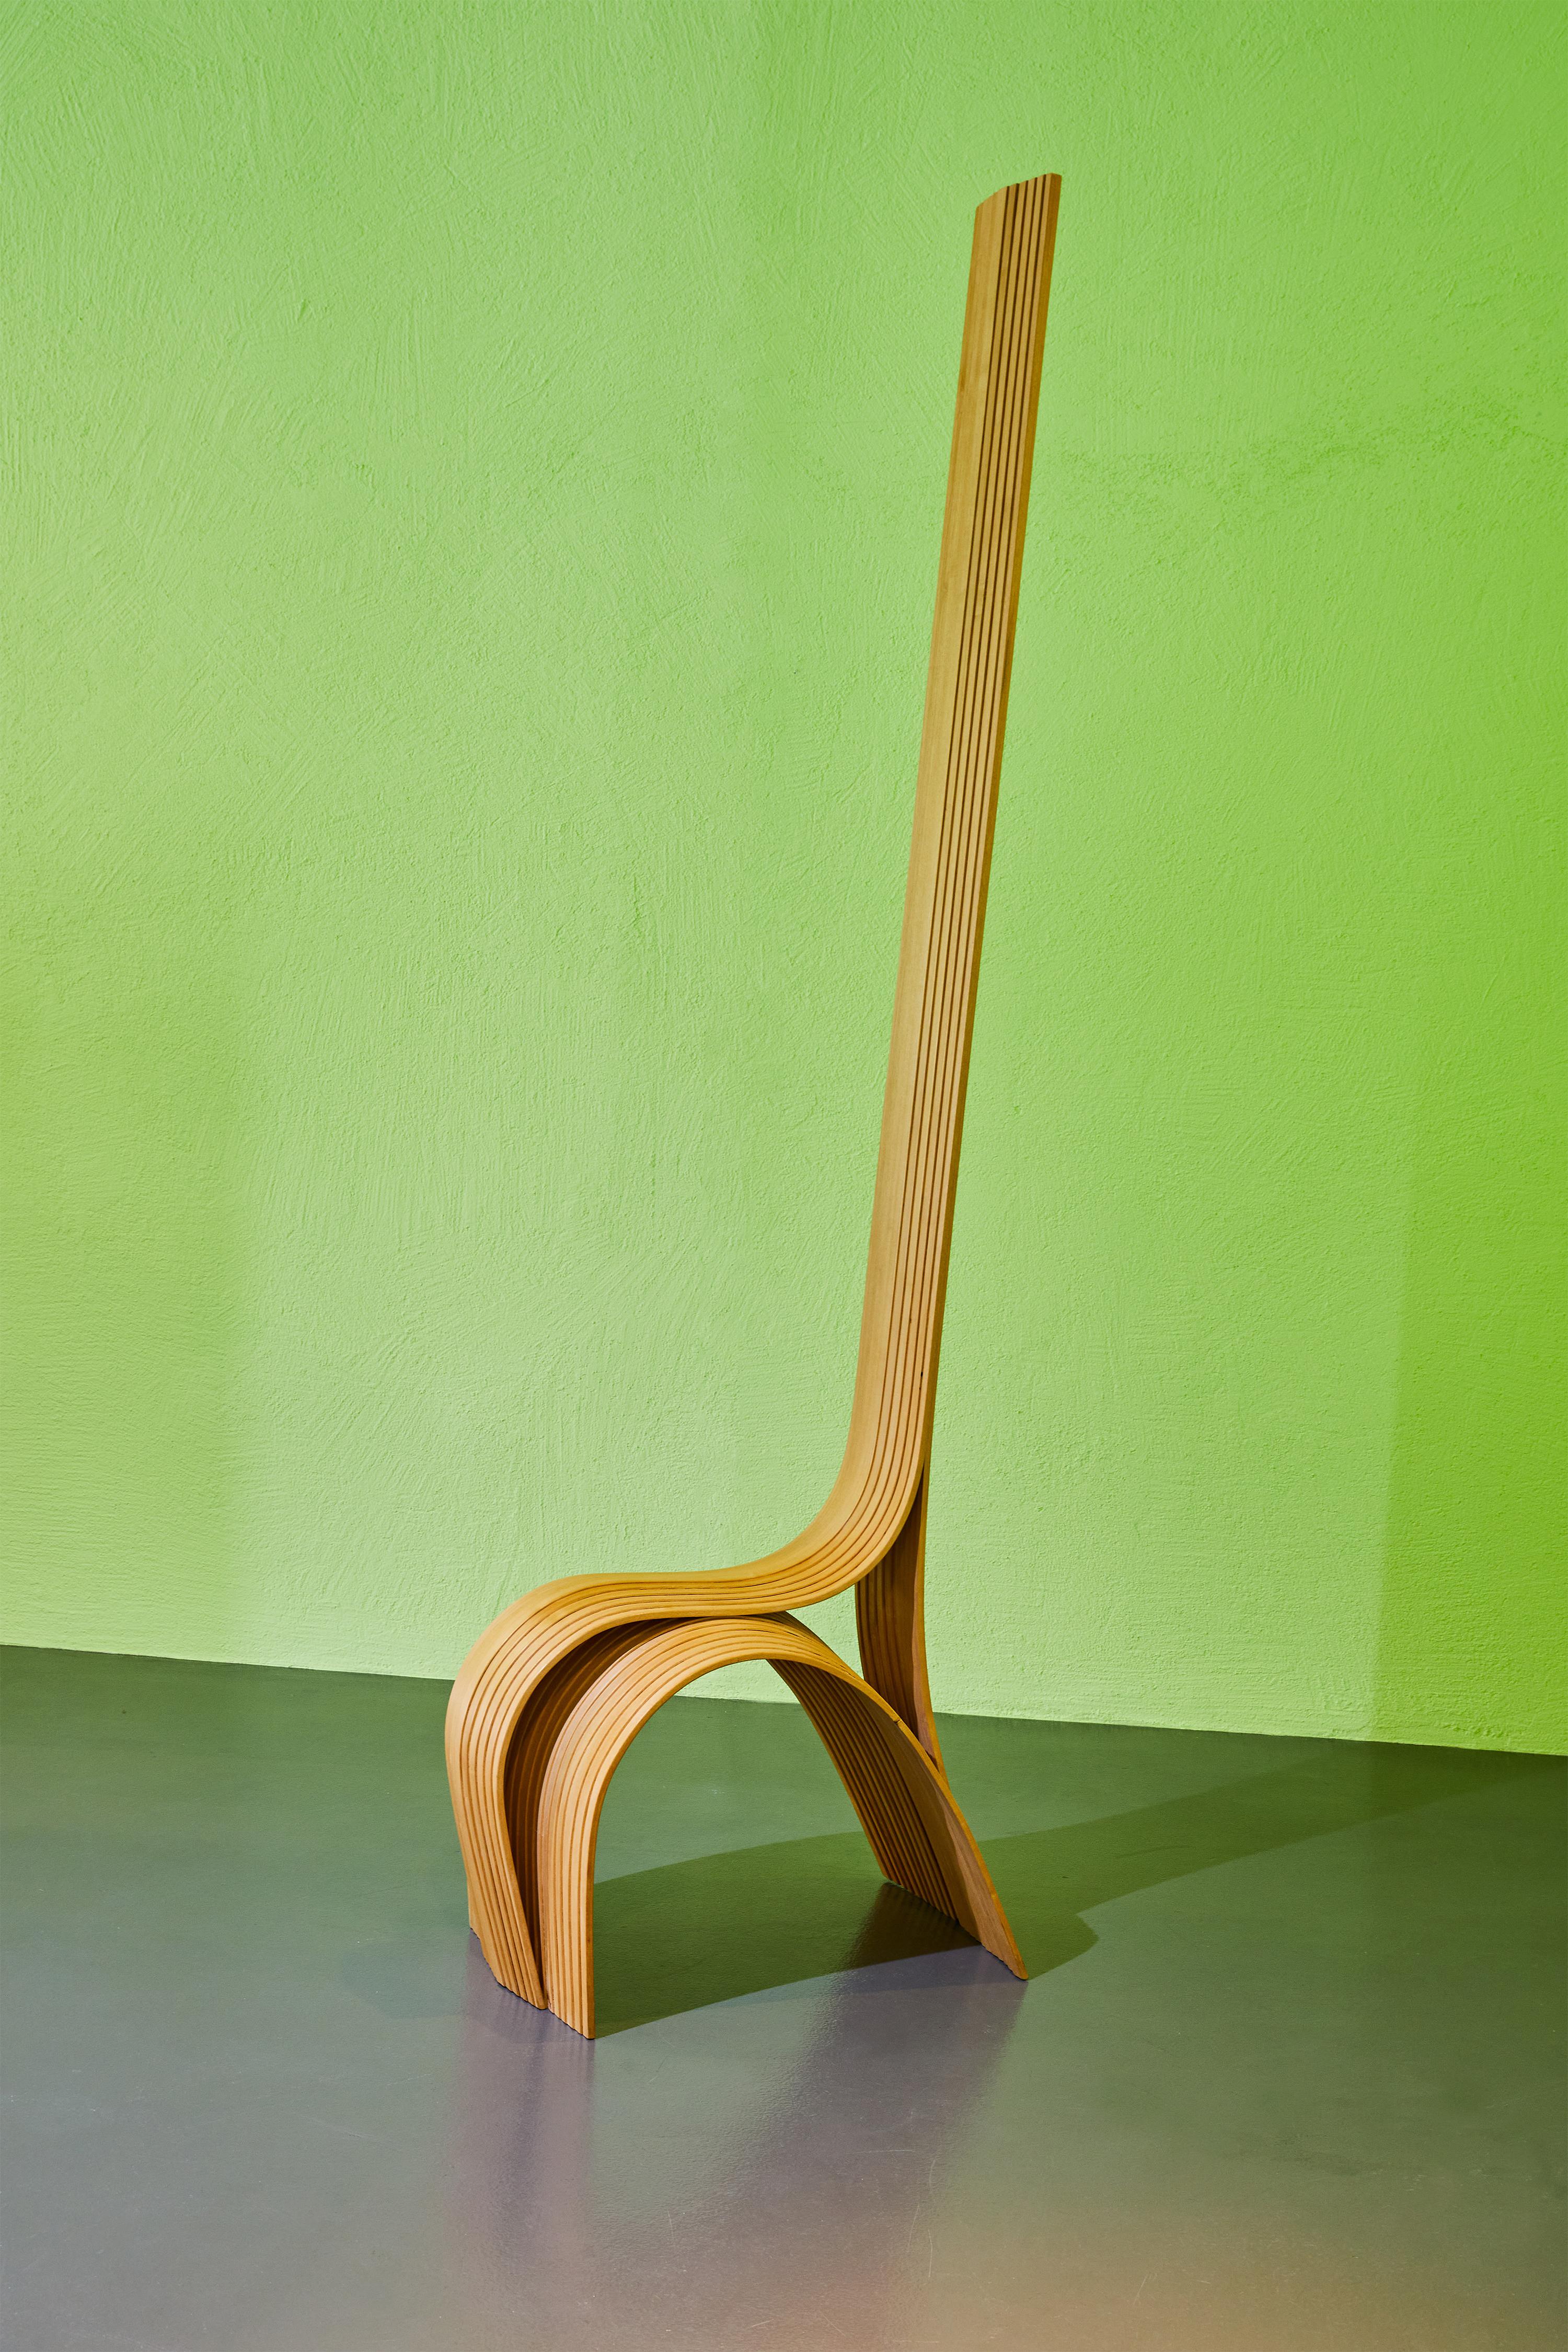 Sculptural chair made of hard wood; it is hand-made by the designer thanks to the steam bending technique.
The name M10 is inspired by the technical term for a grade in mixed ice climbing.

Unique piece. Limited edition of 1 piece only.

Size: 70 x